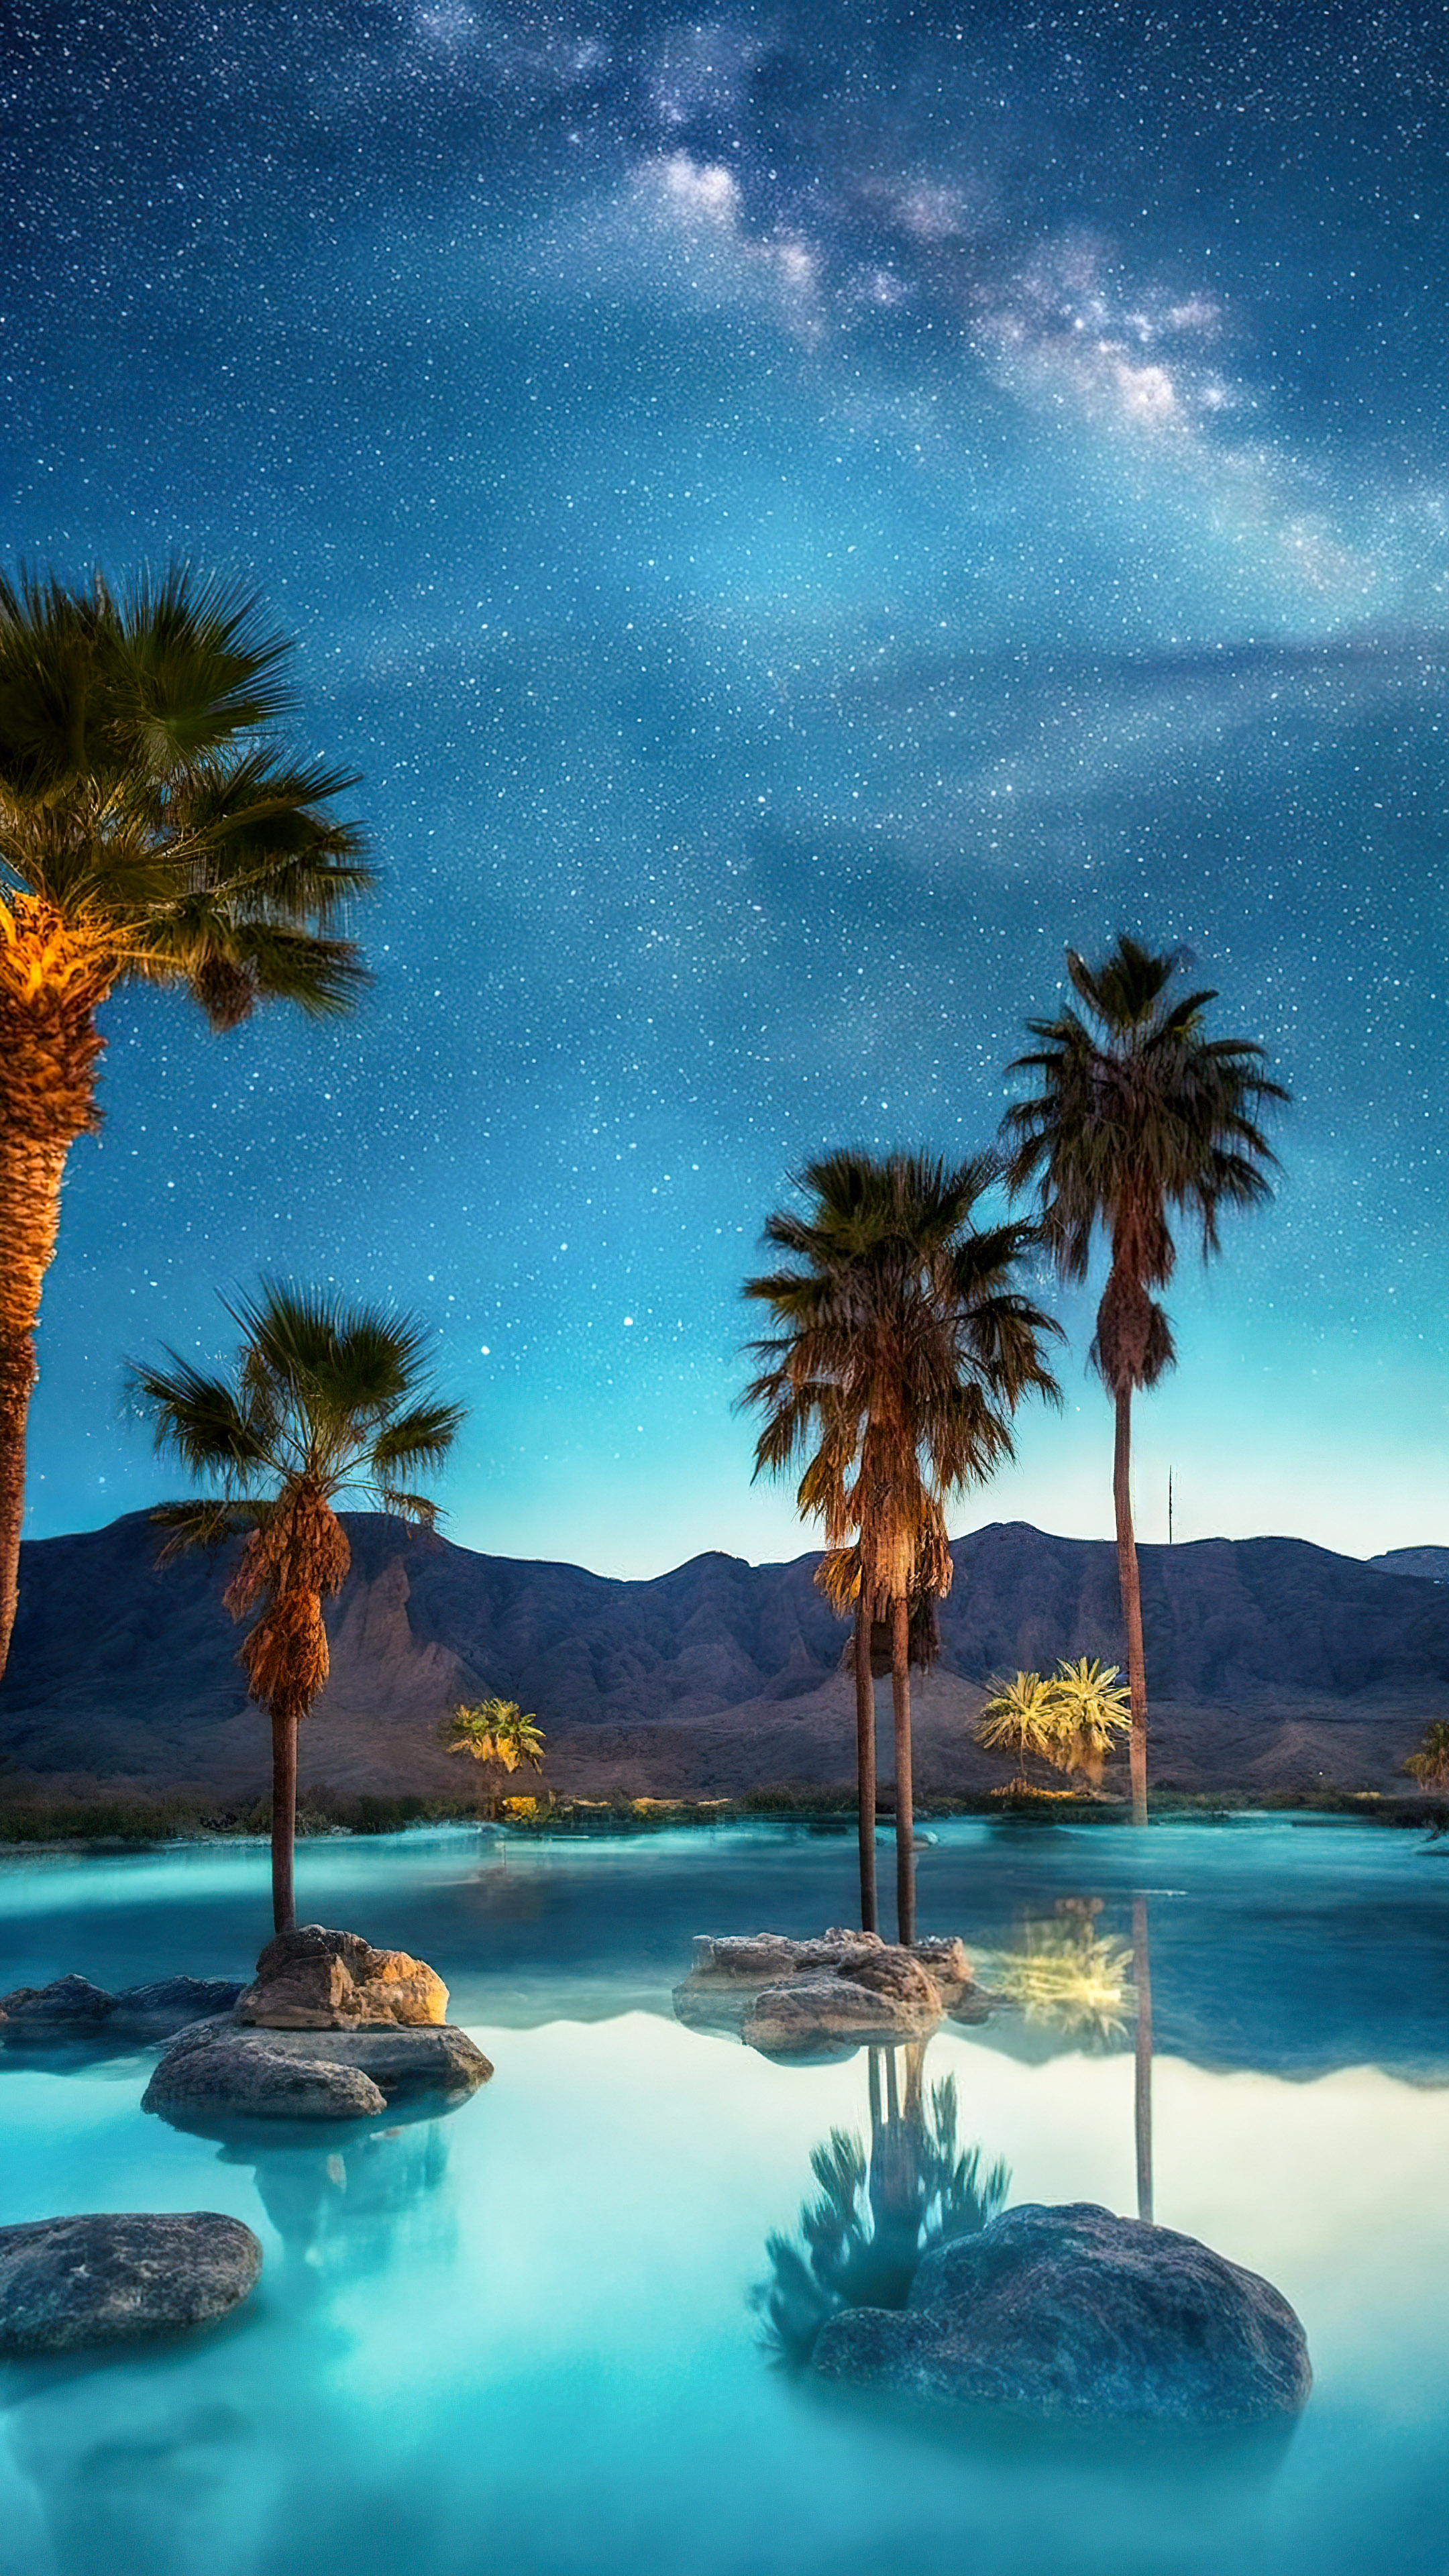 Transform your mobile device’s screen with our beach night background, where palm trees surround a serene, starry pool.